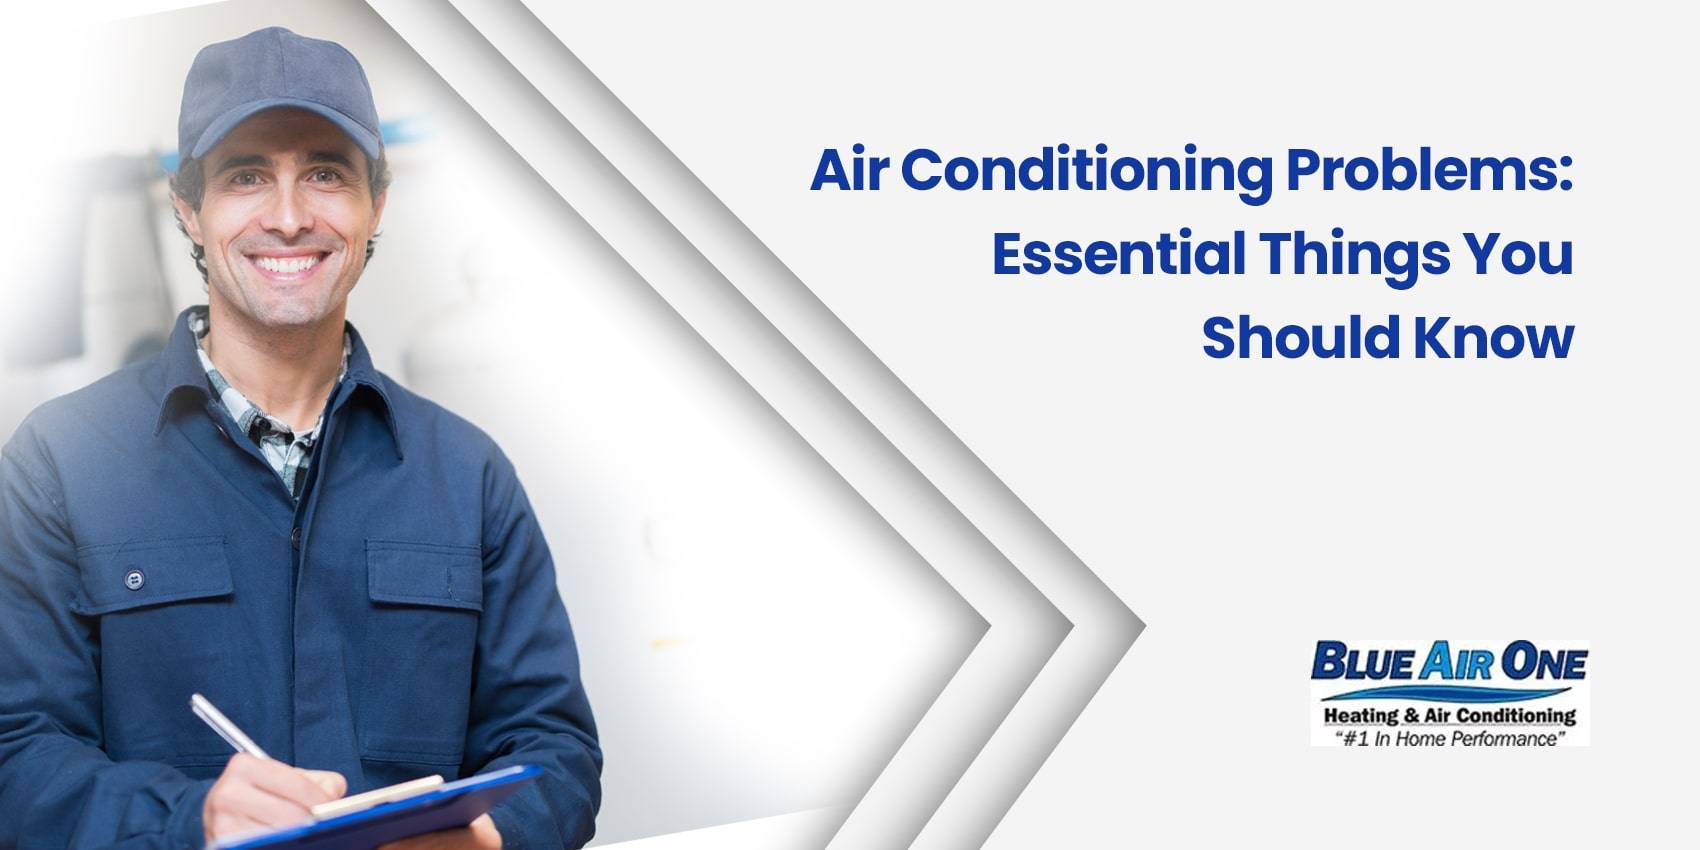 Air Conditioning Problems: Essential Things You Should Know